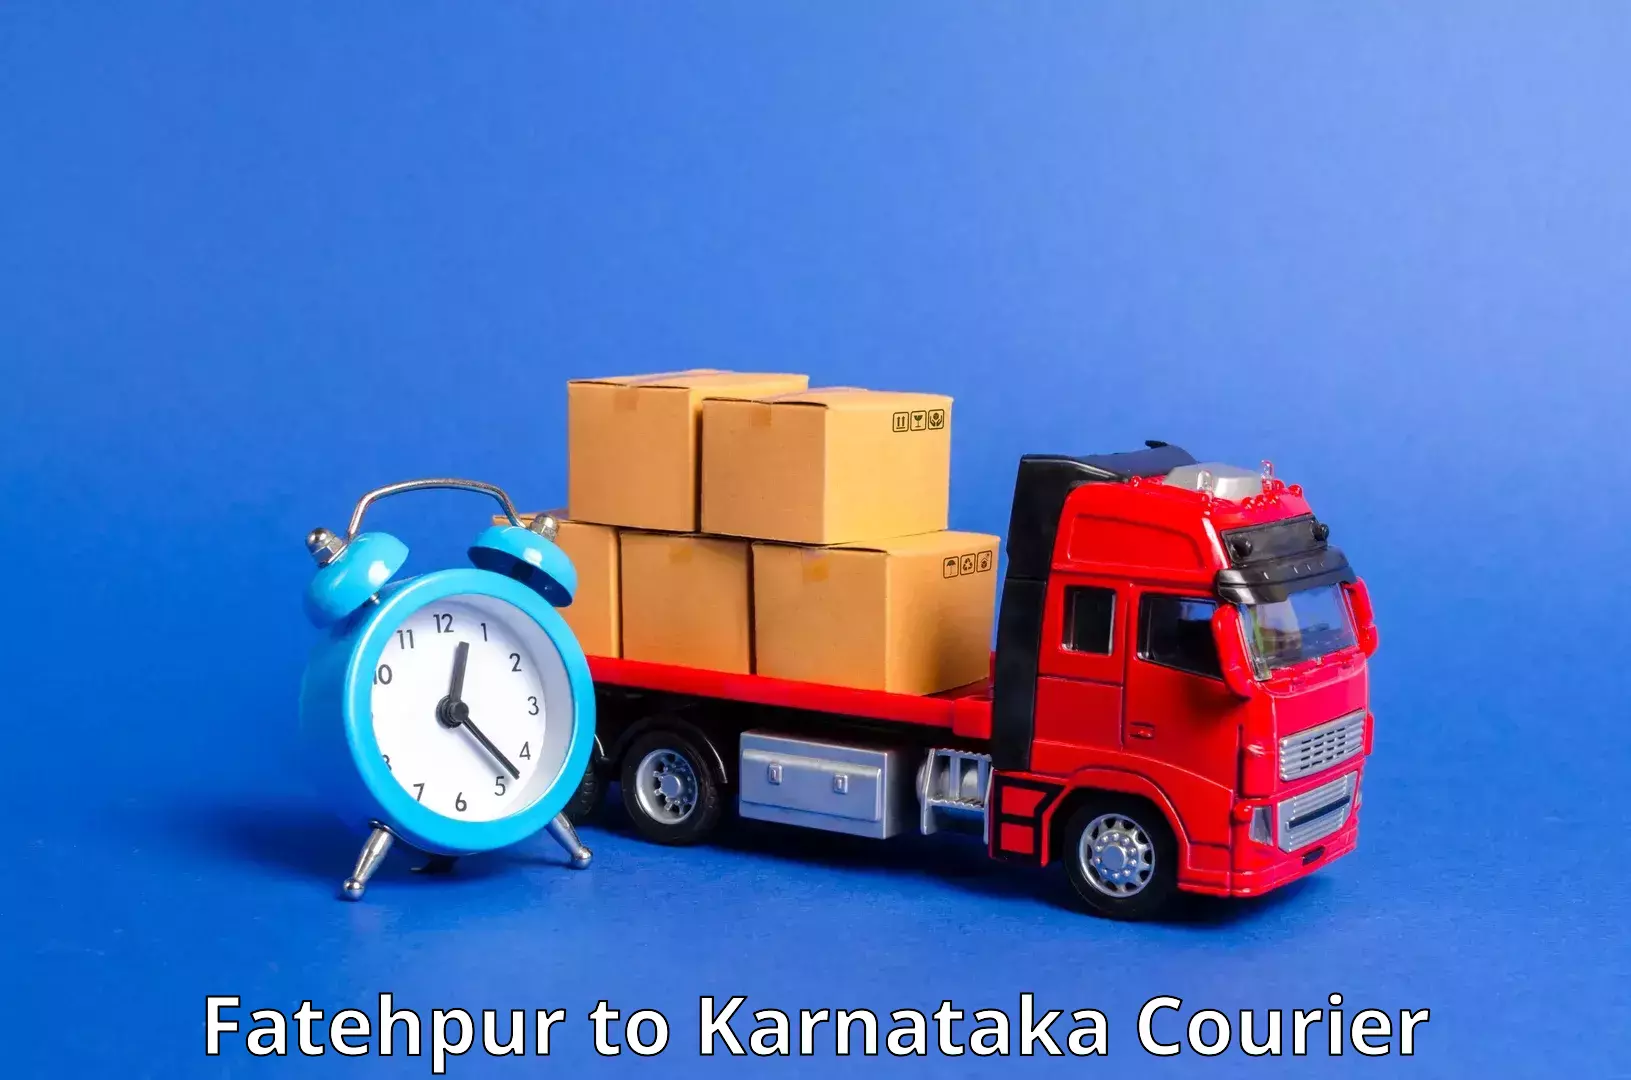 Doorstep delivery service Fatehpur to Pedapudi